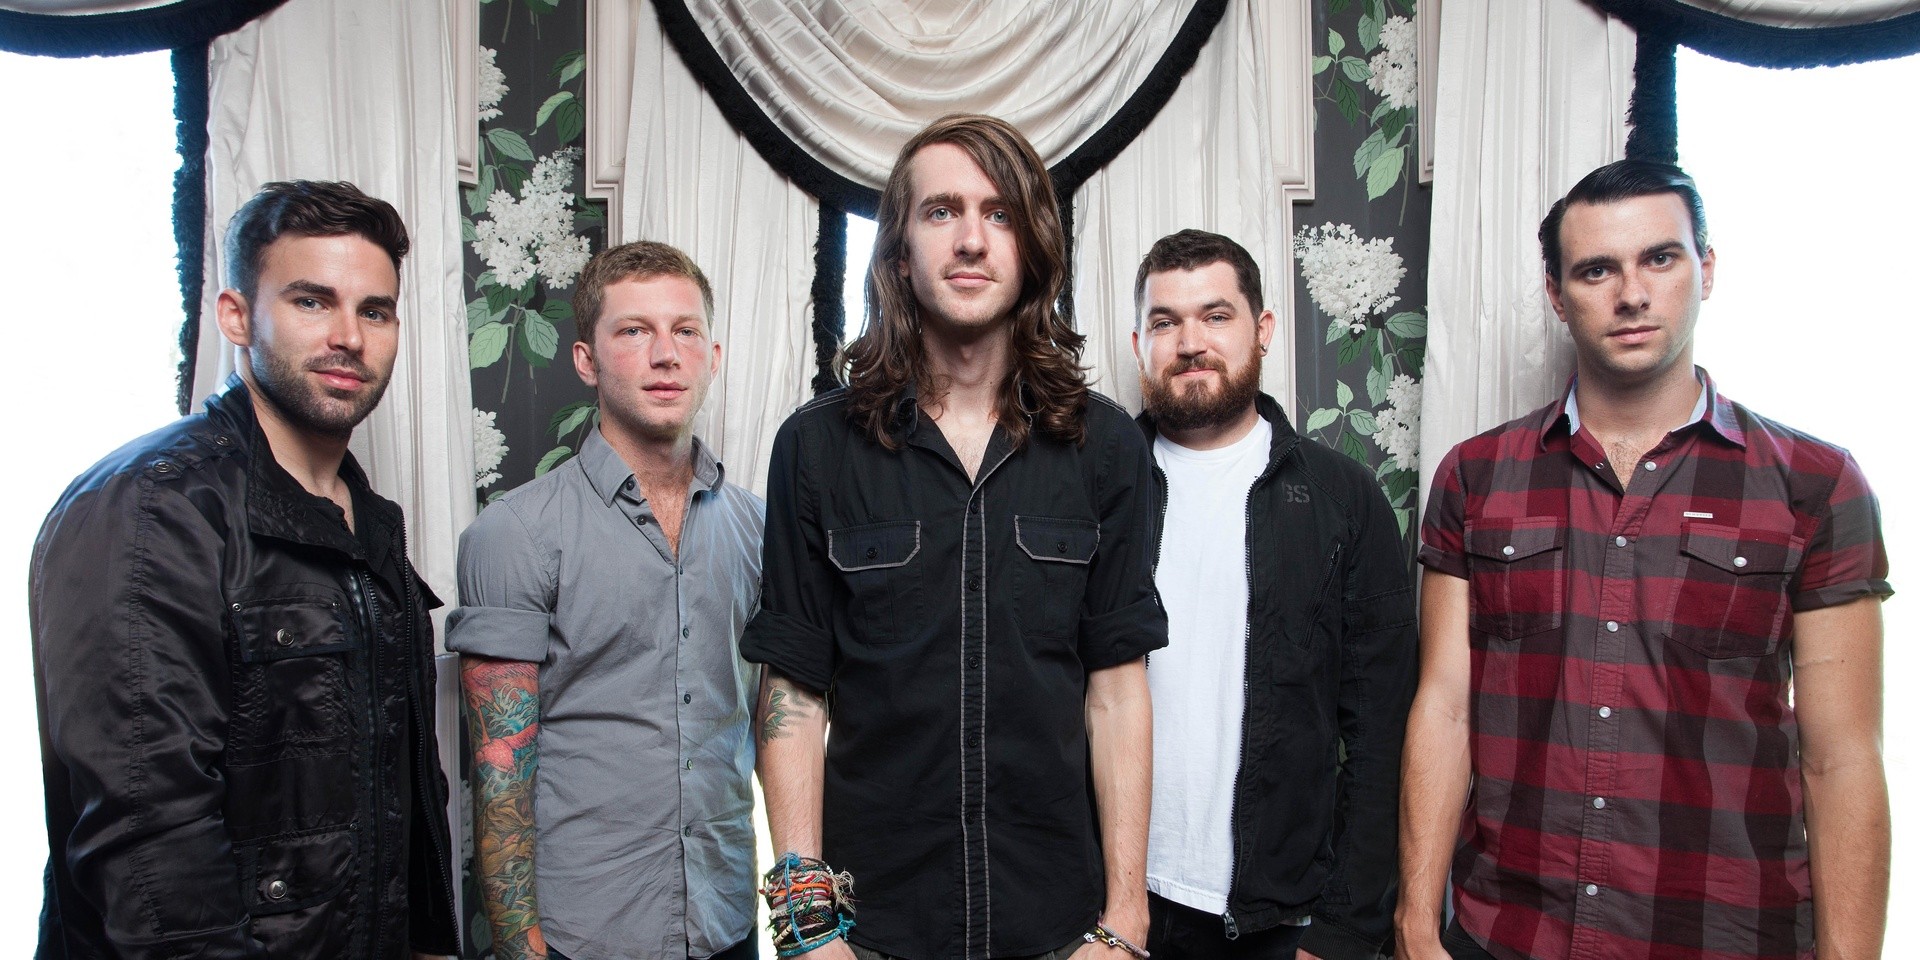 Mayday Parade return to Singapore in October